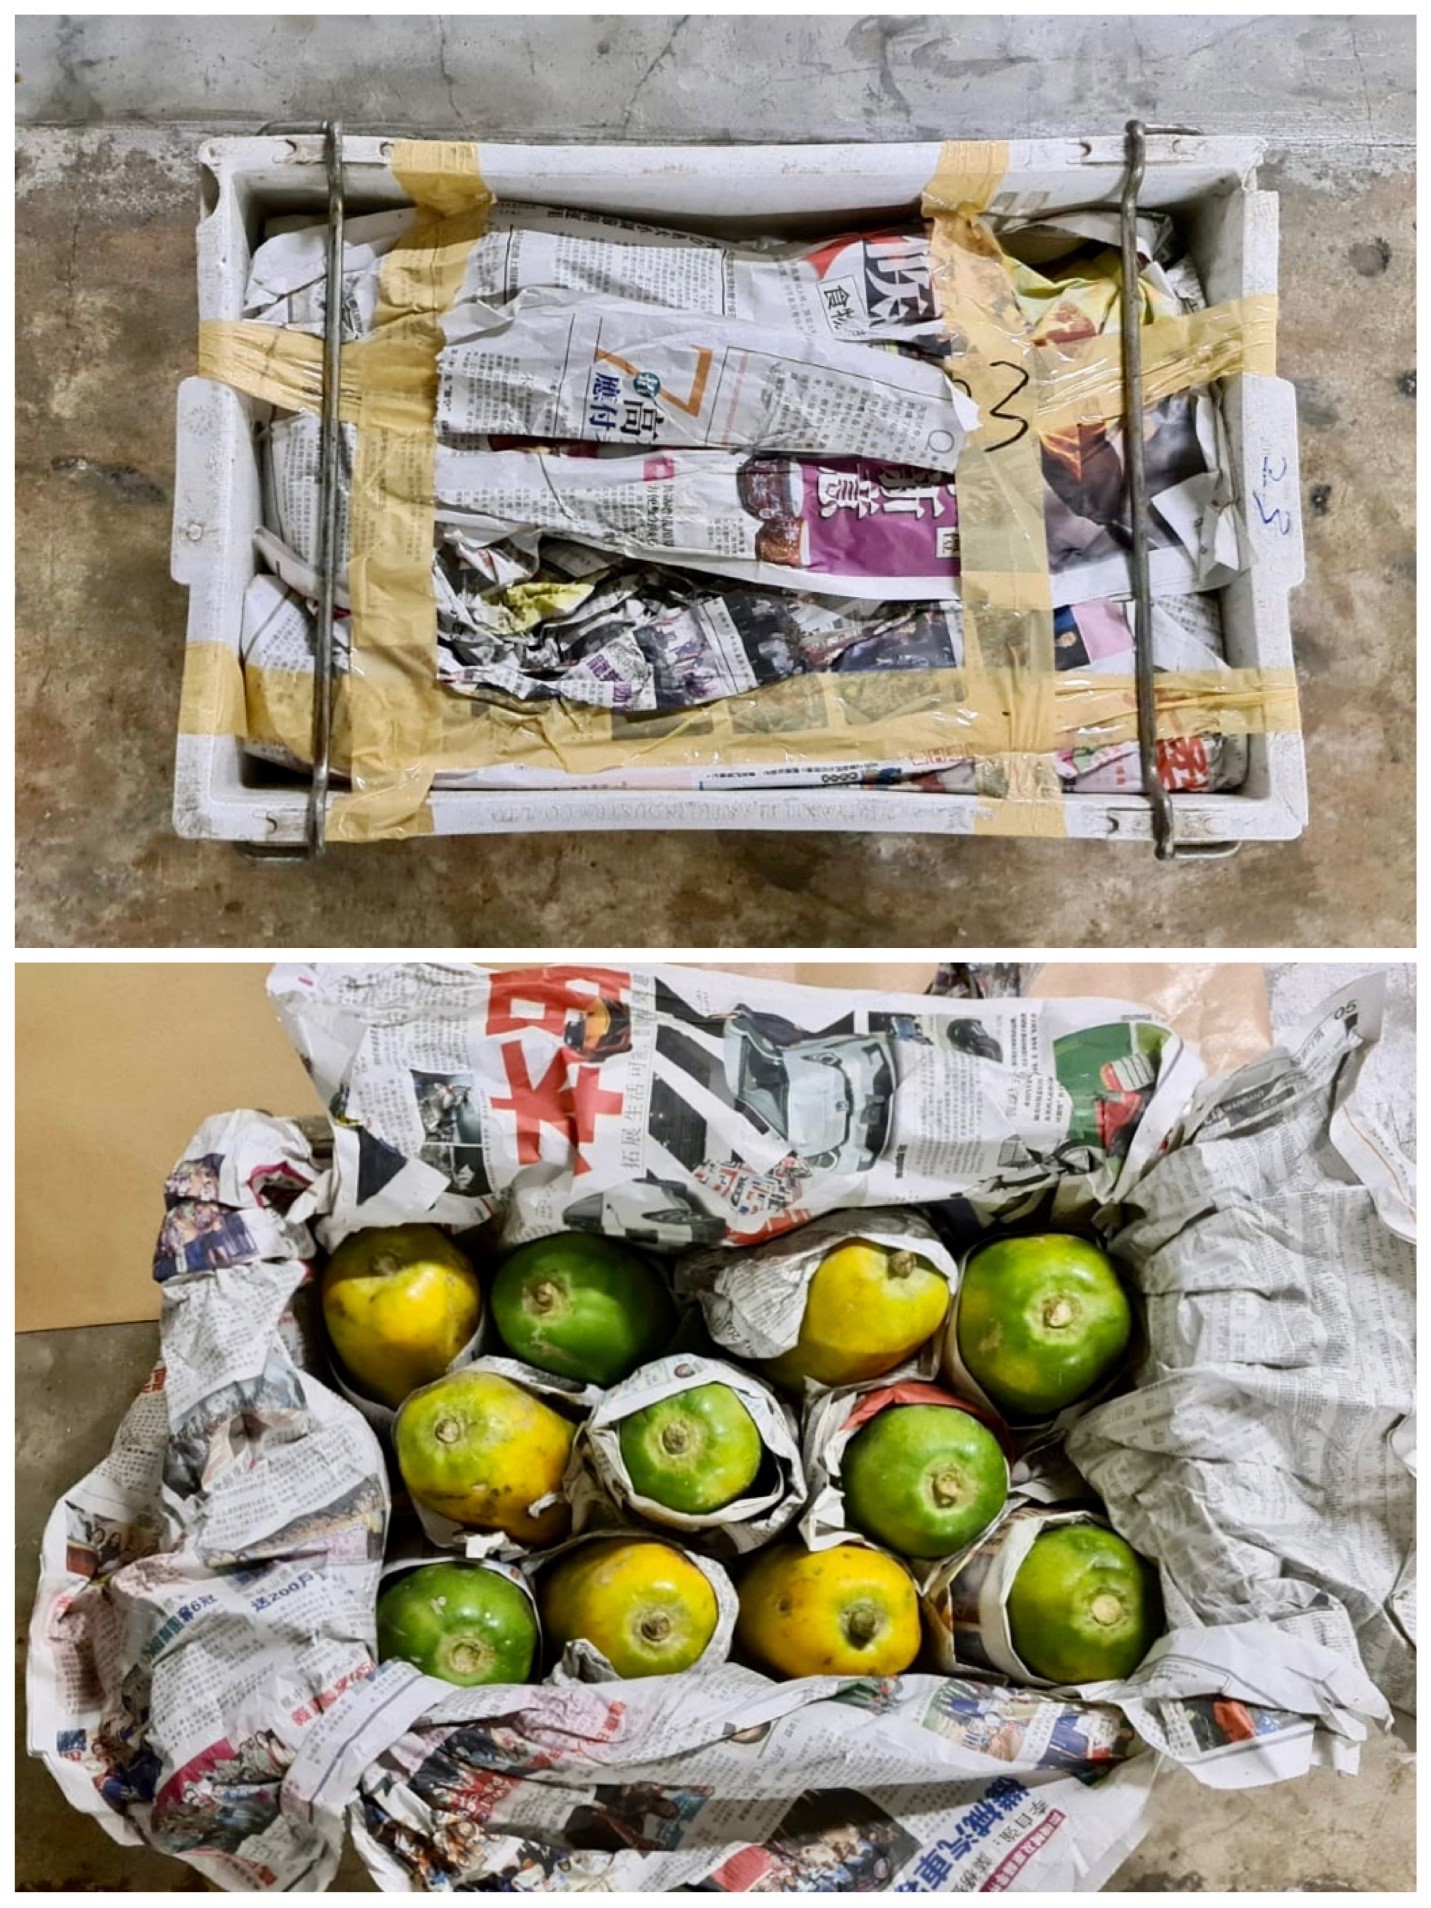 Photos 1 and 2: Papayas seized from a vehicle in the vicinity of River Valley Road on 17 September 2020